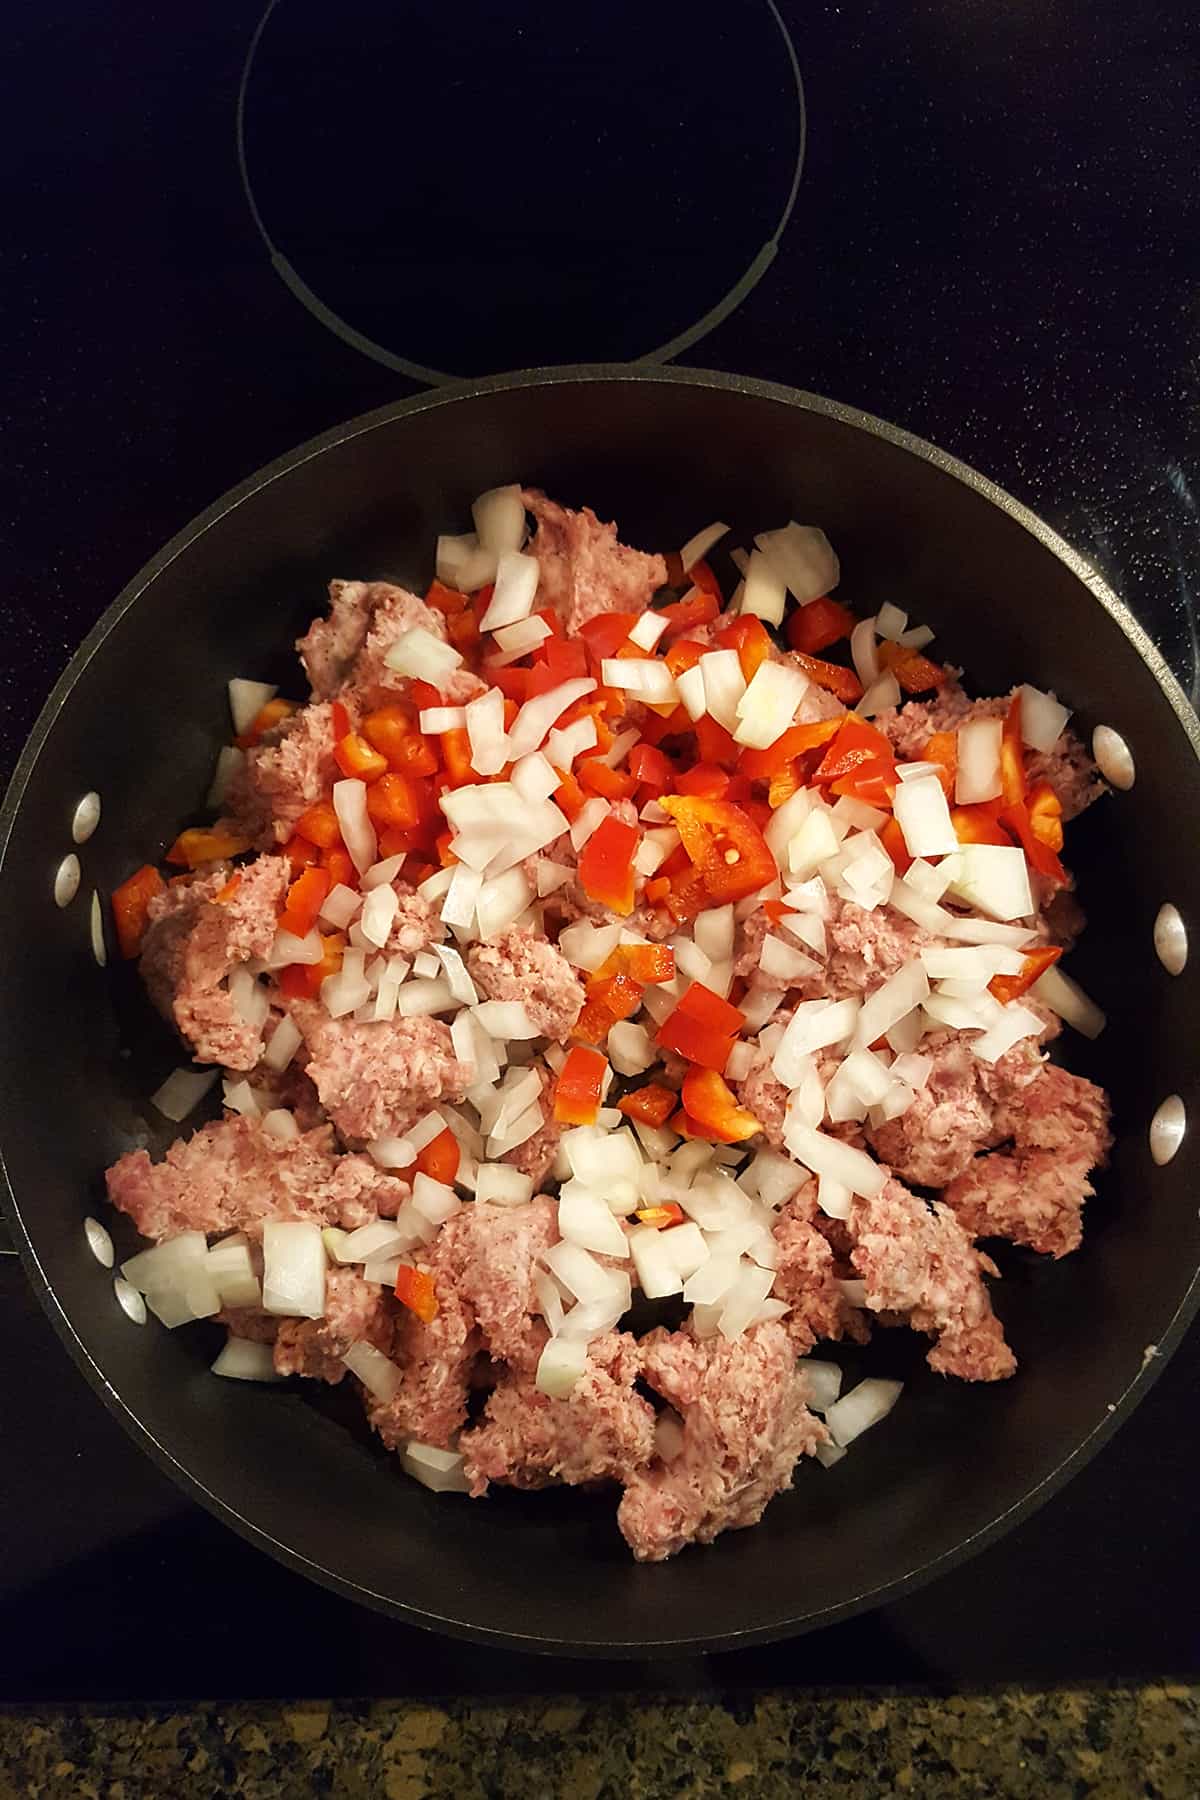 Onions, peppers, and sausage cooking in a skillet.